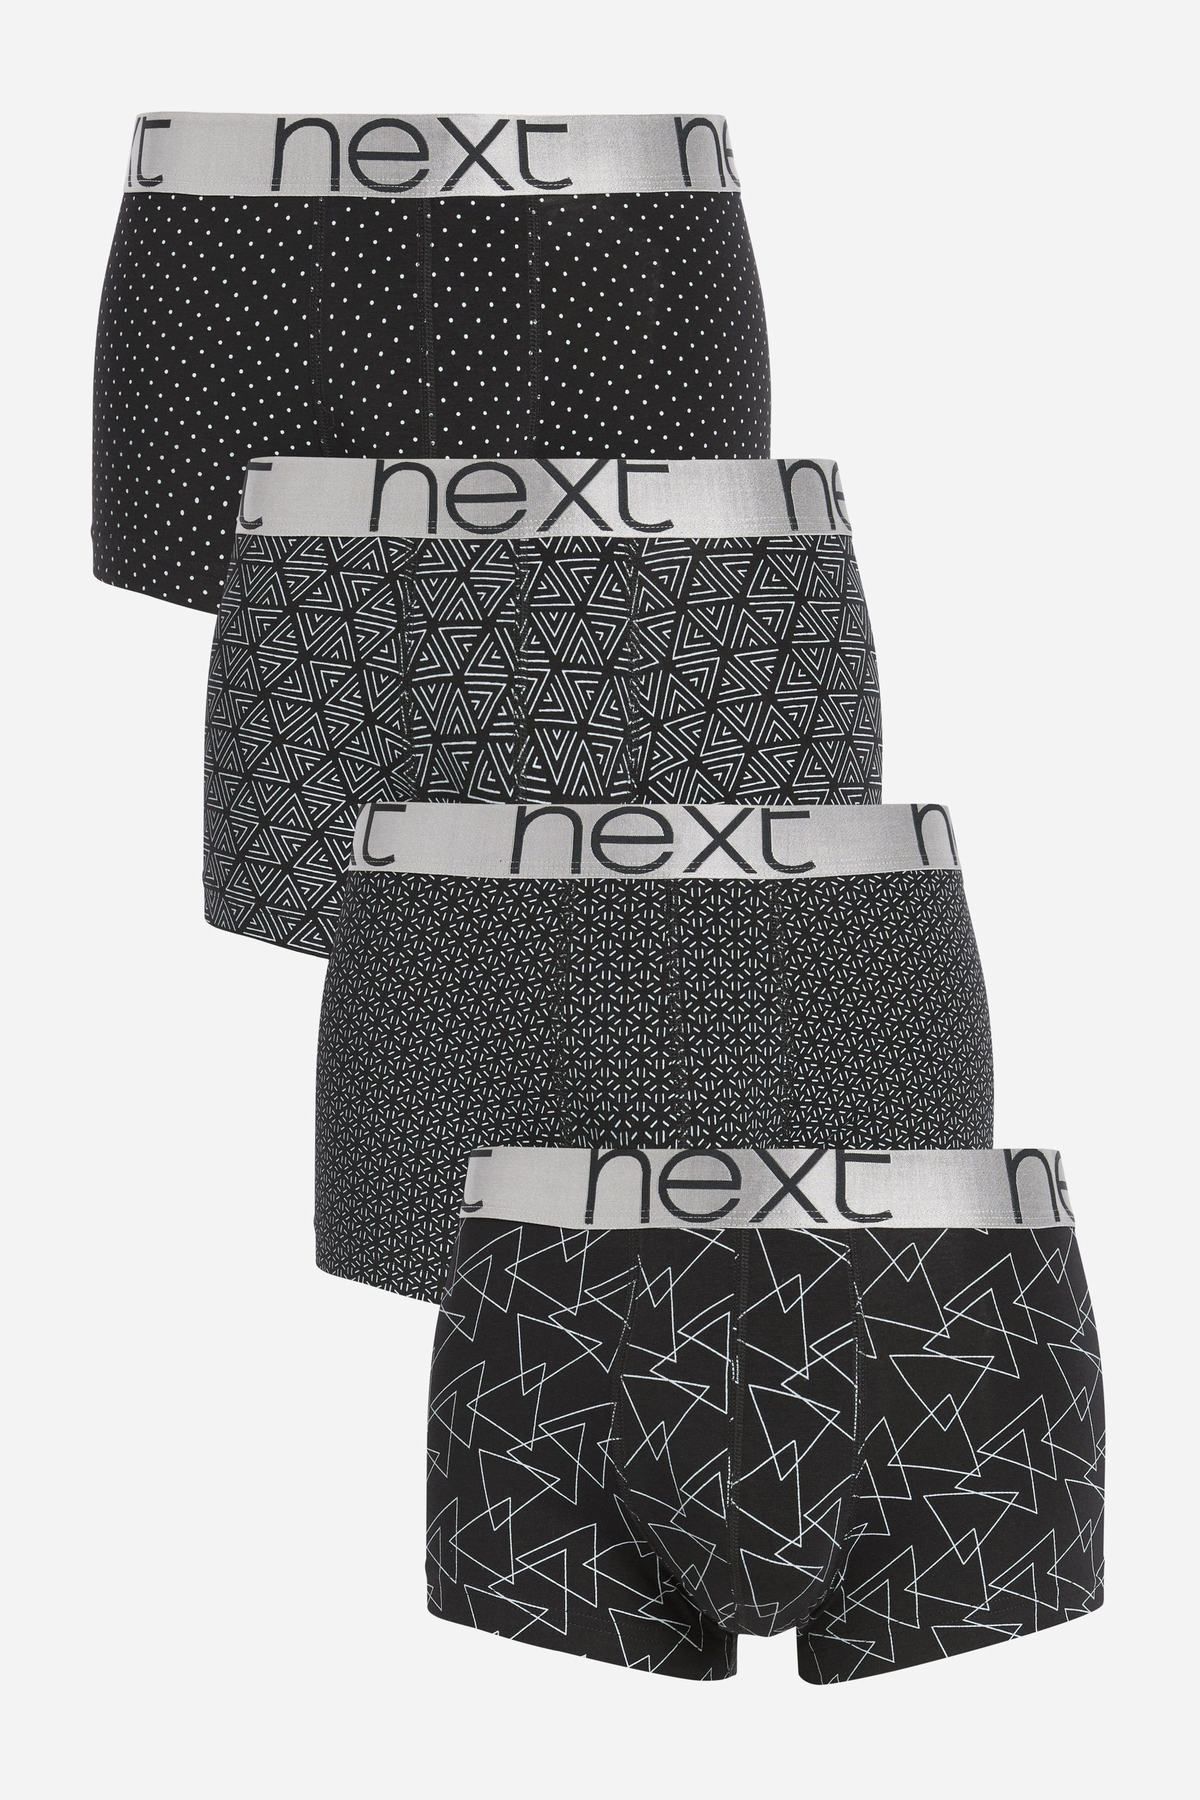 Men’s Next Boxers Hipsters Underwear 4 Pack M 33-35” *New* RRP £24